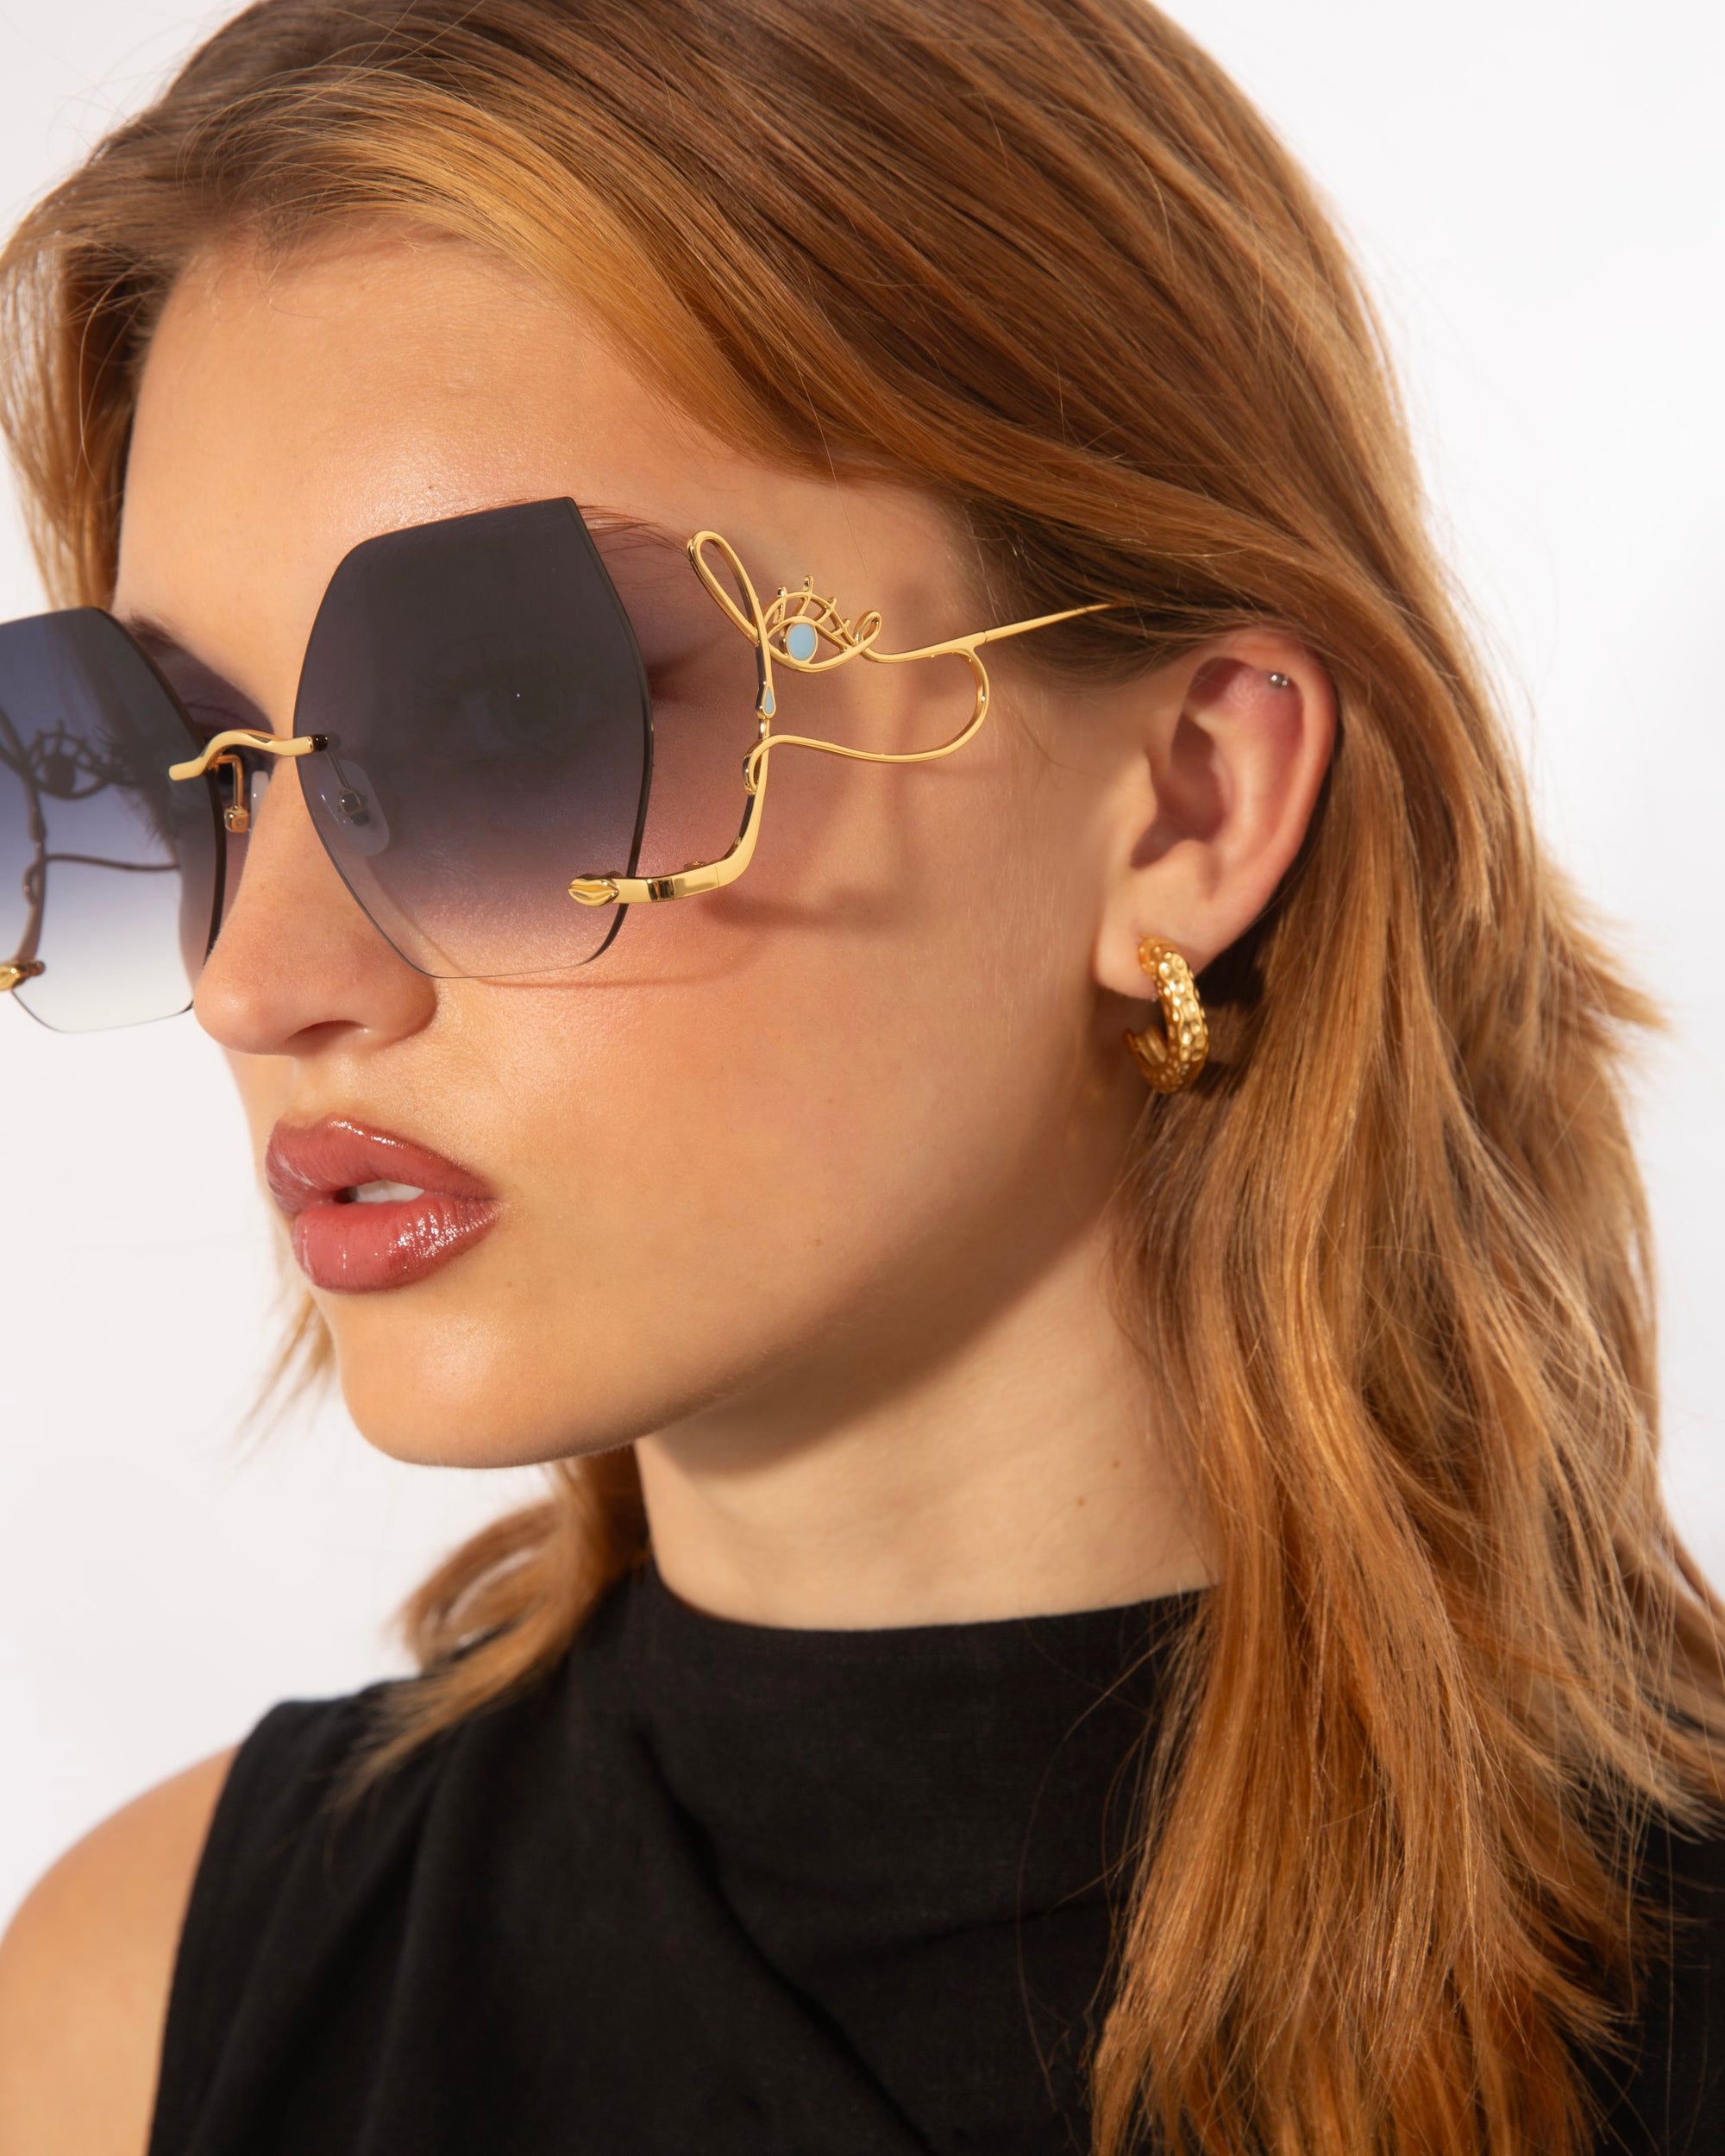 A woman with light brown hair wears large, hexagonal Cry Me a River sunglasses from For Art&#39;s Sake® with gradient lenses and gold wireframes. She has a small hoop earring and is dressed in a sleeveless black top, looking to the left against a plain white background. This limited edition accessory exudes timeless elegance.